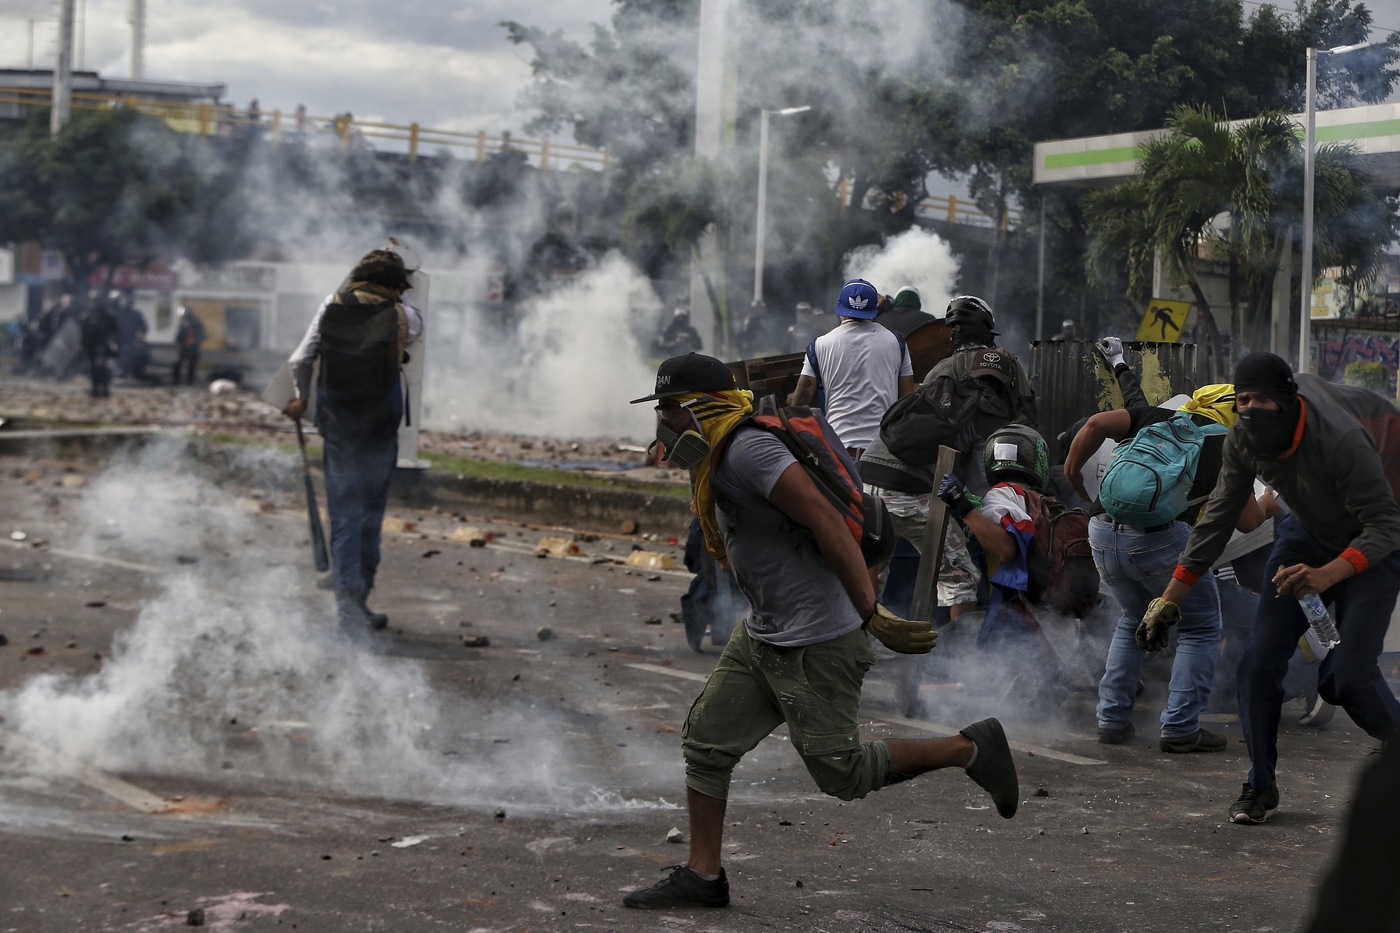 Protesters run from the tear gas during a national strike against tax reform in Cali, Colombia, Monday, May 3, 2021. Colombia's President Ivan Duque withdrew the government-proposed tax reform on Sunday. (AP Photo/Andres Gonzalez)